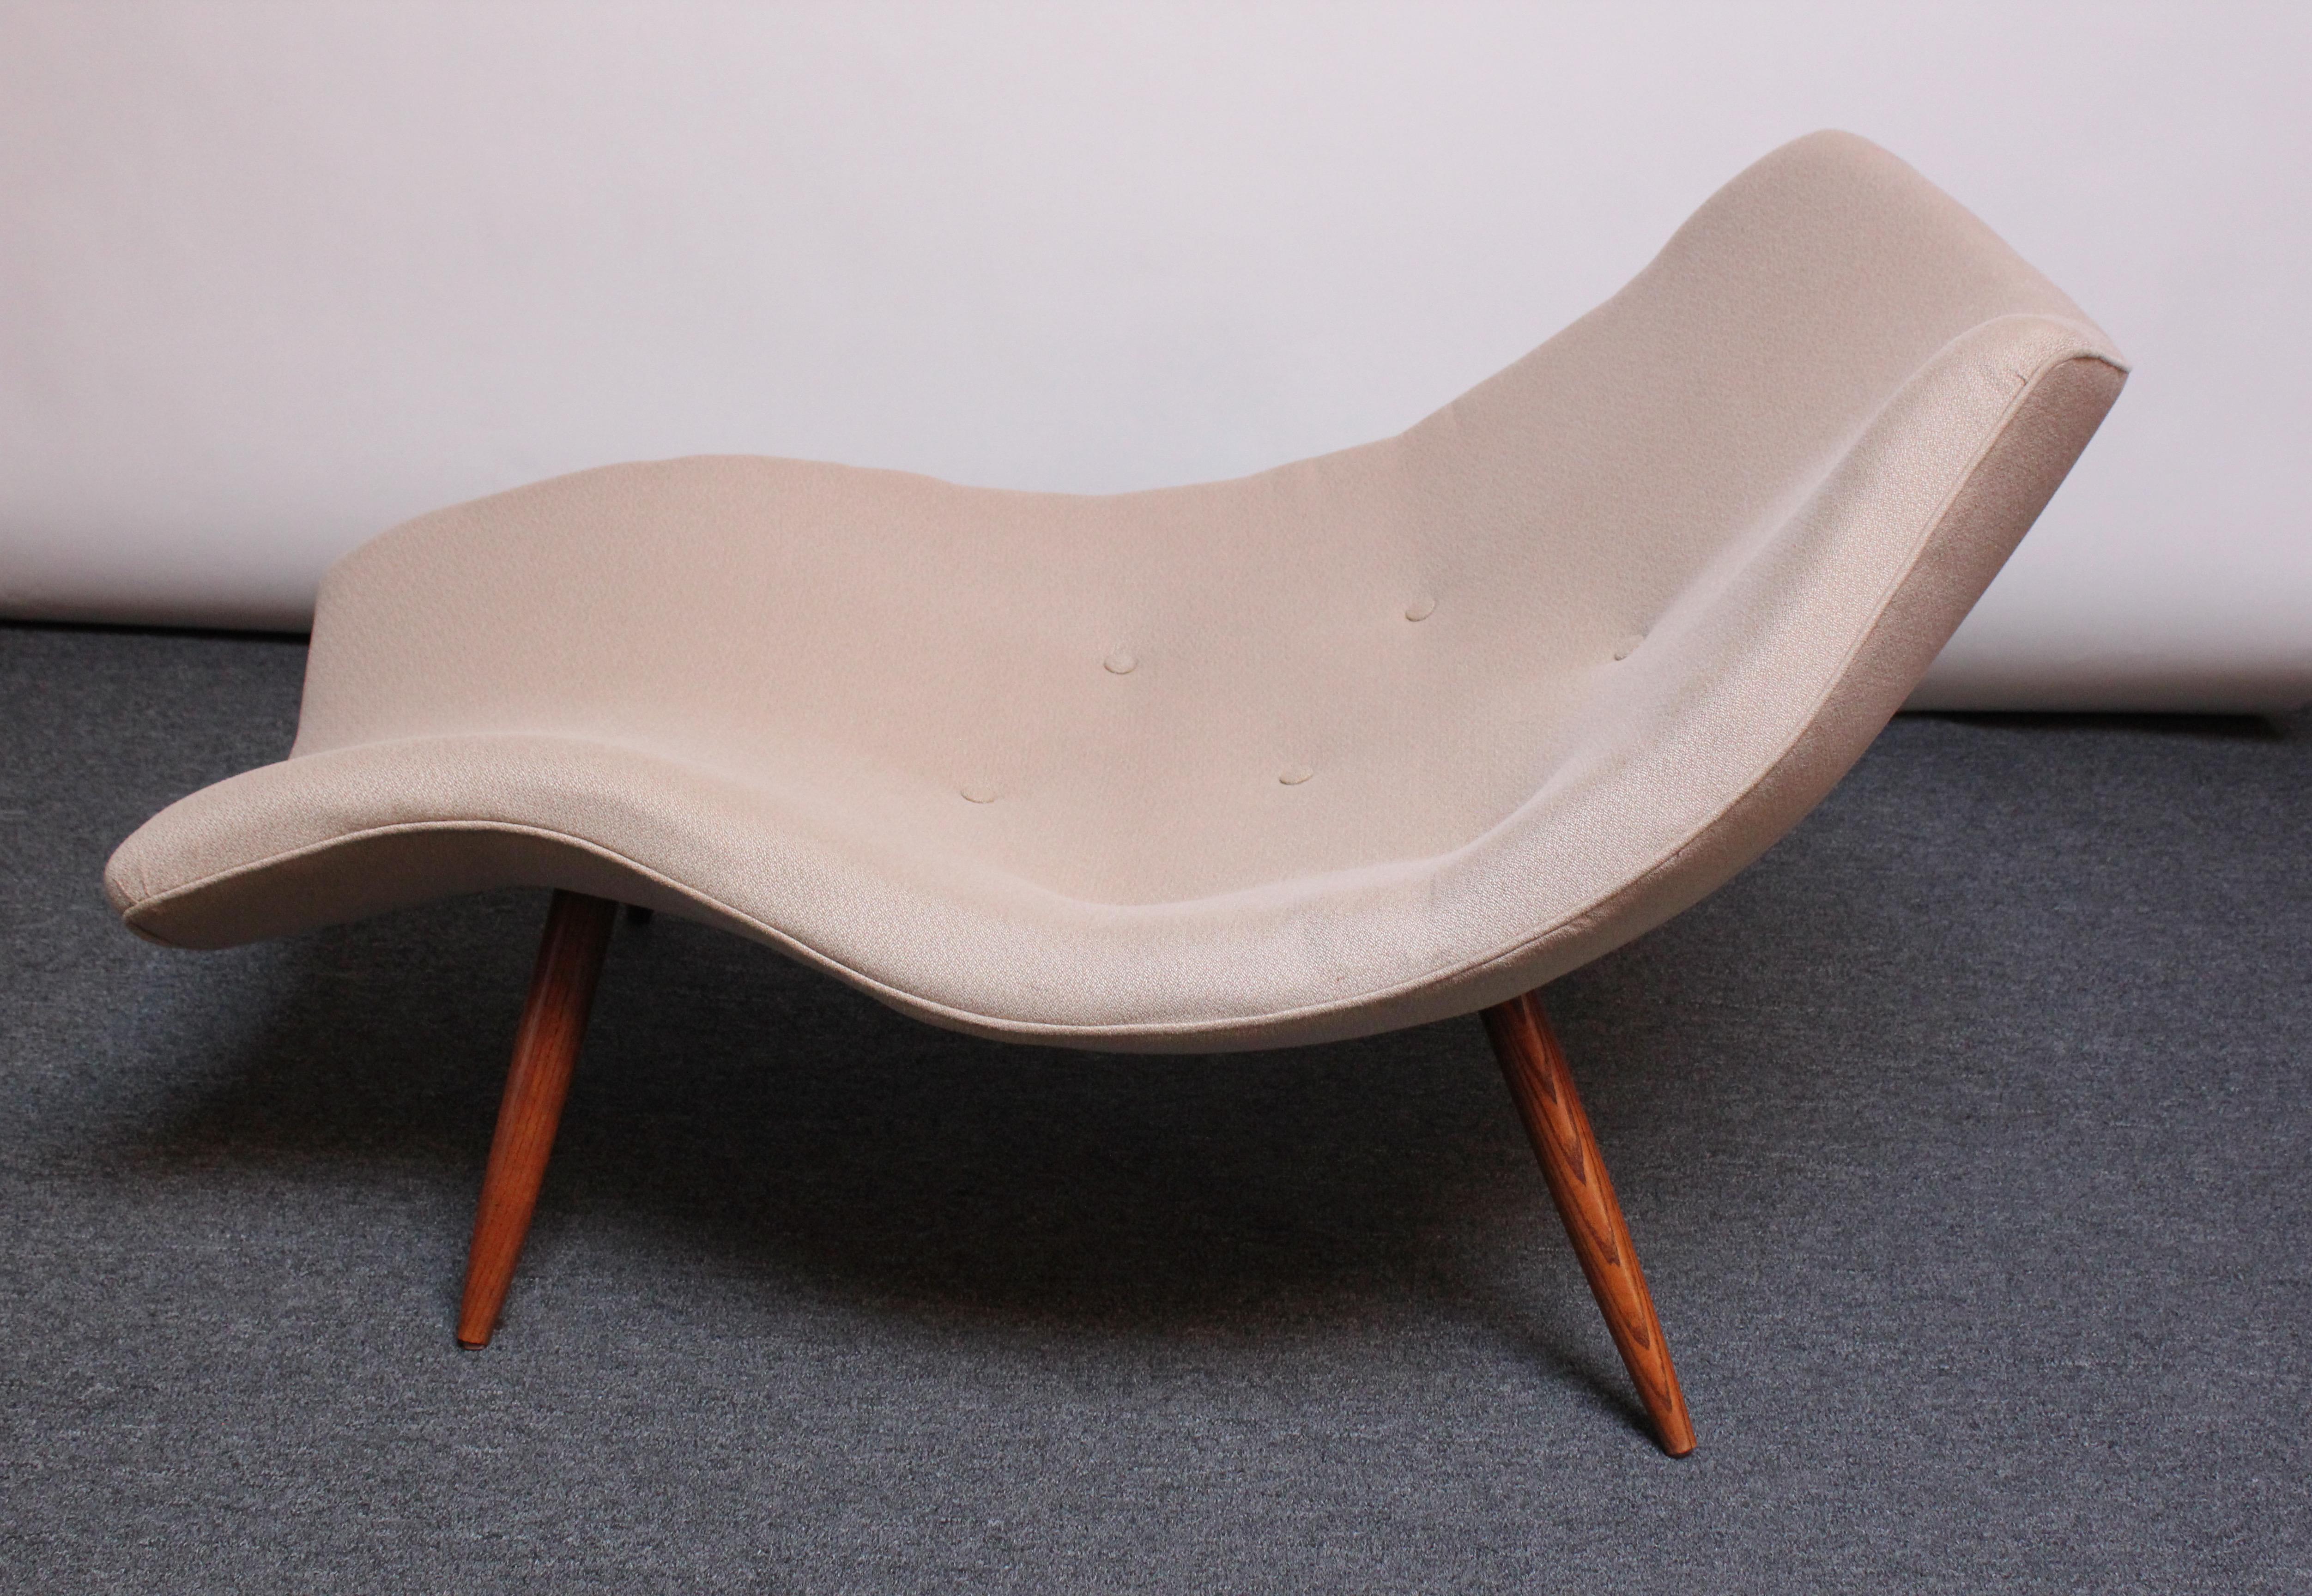 Wool Vintage Sculptural Adrian Pearsall Chaise Lounge for Craft Associates